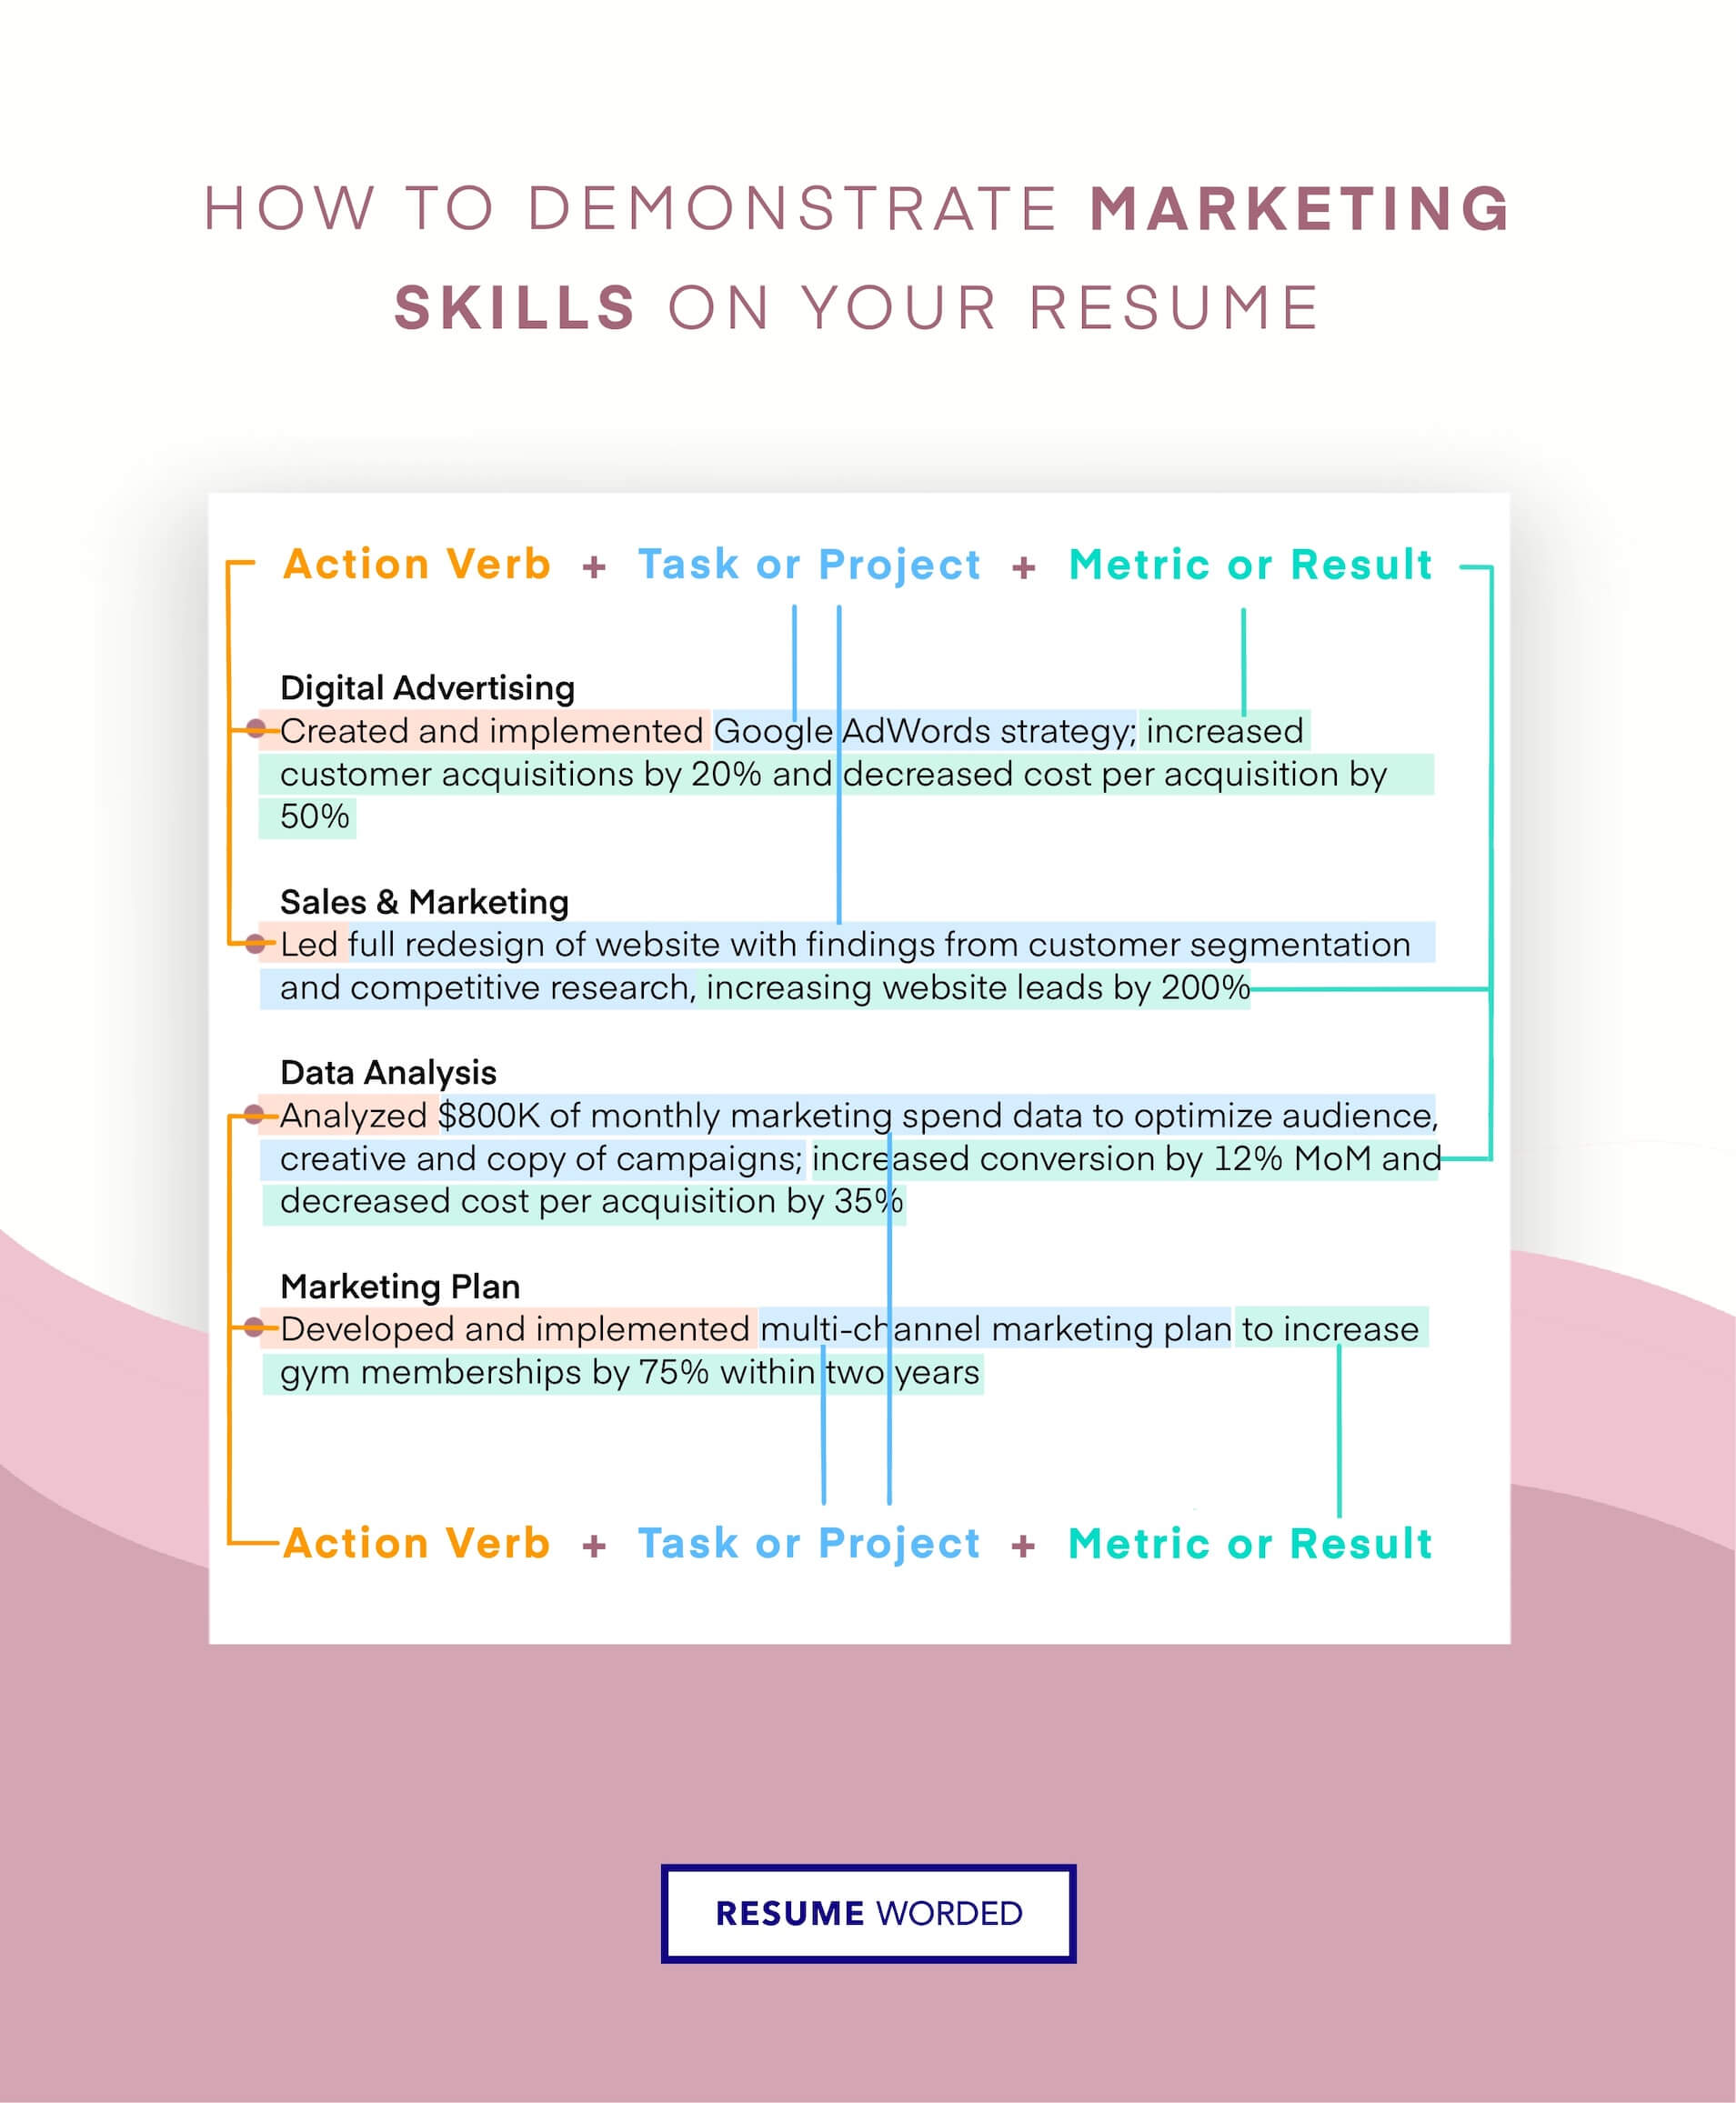 Focus on marketing skills in the skills section. - Marketing Account Manager Resume